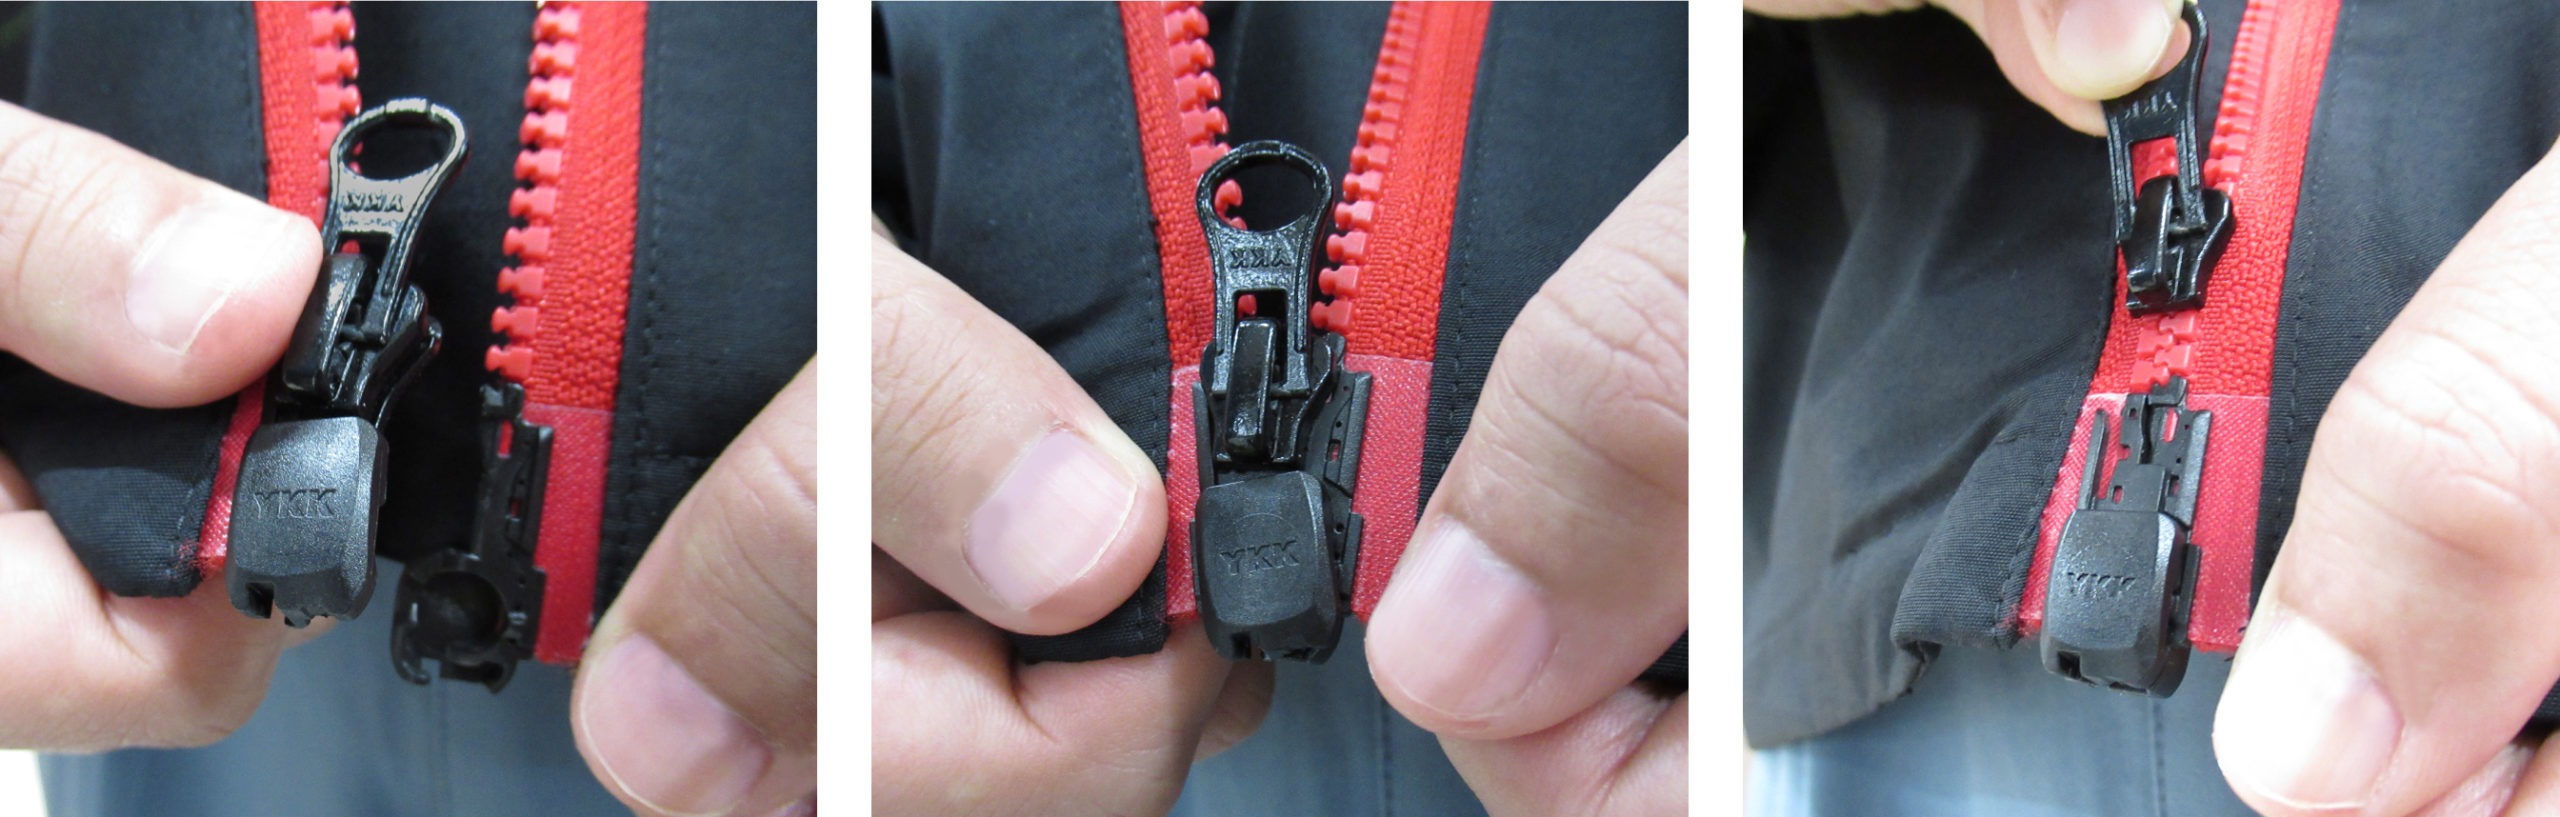 YKK Zippers: Everything You Need To Know About Them ⋆ Expert World Travel